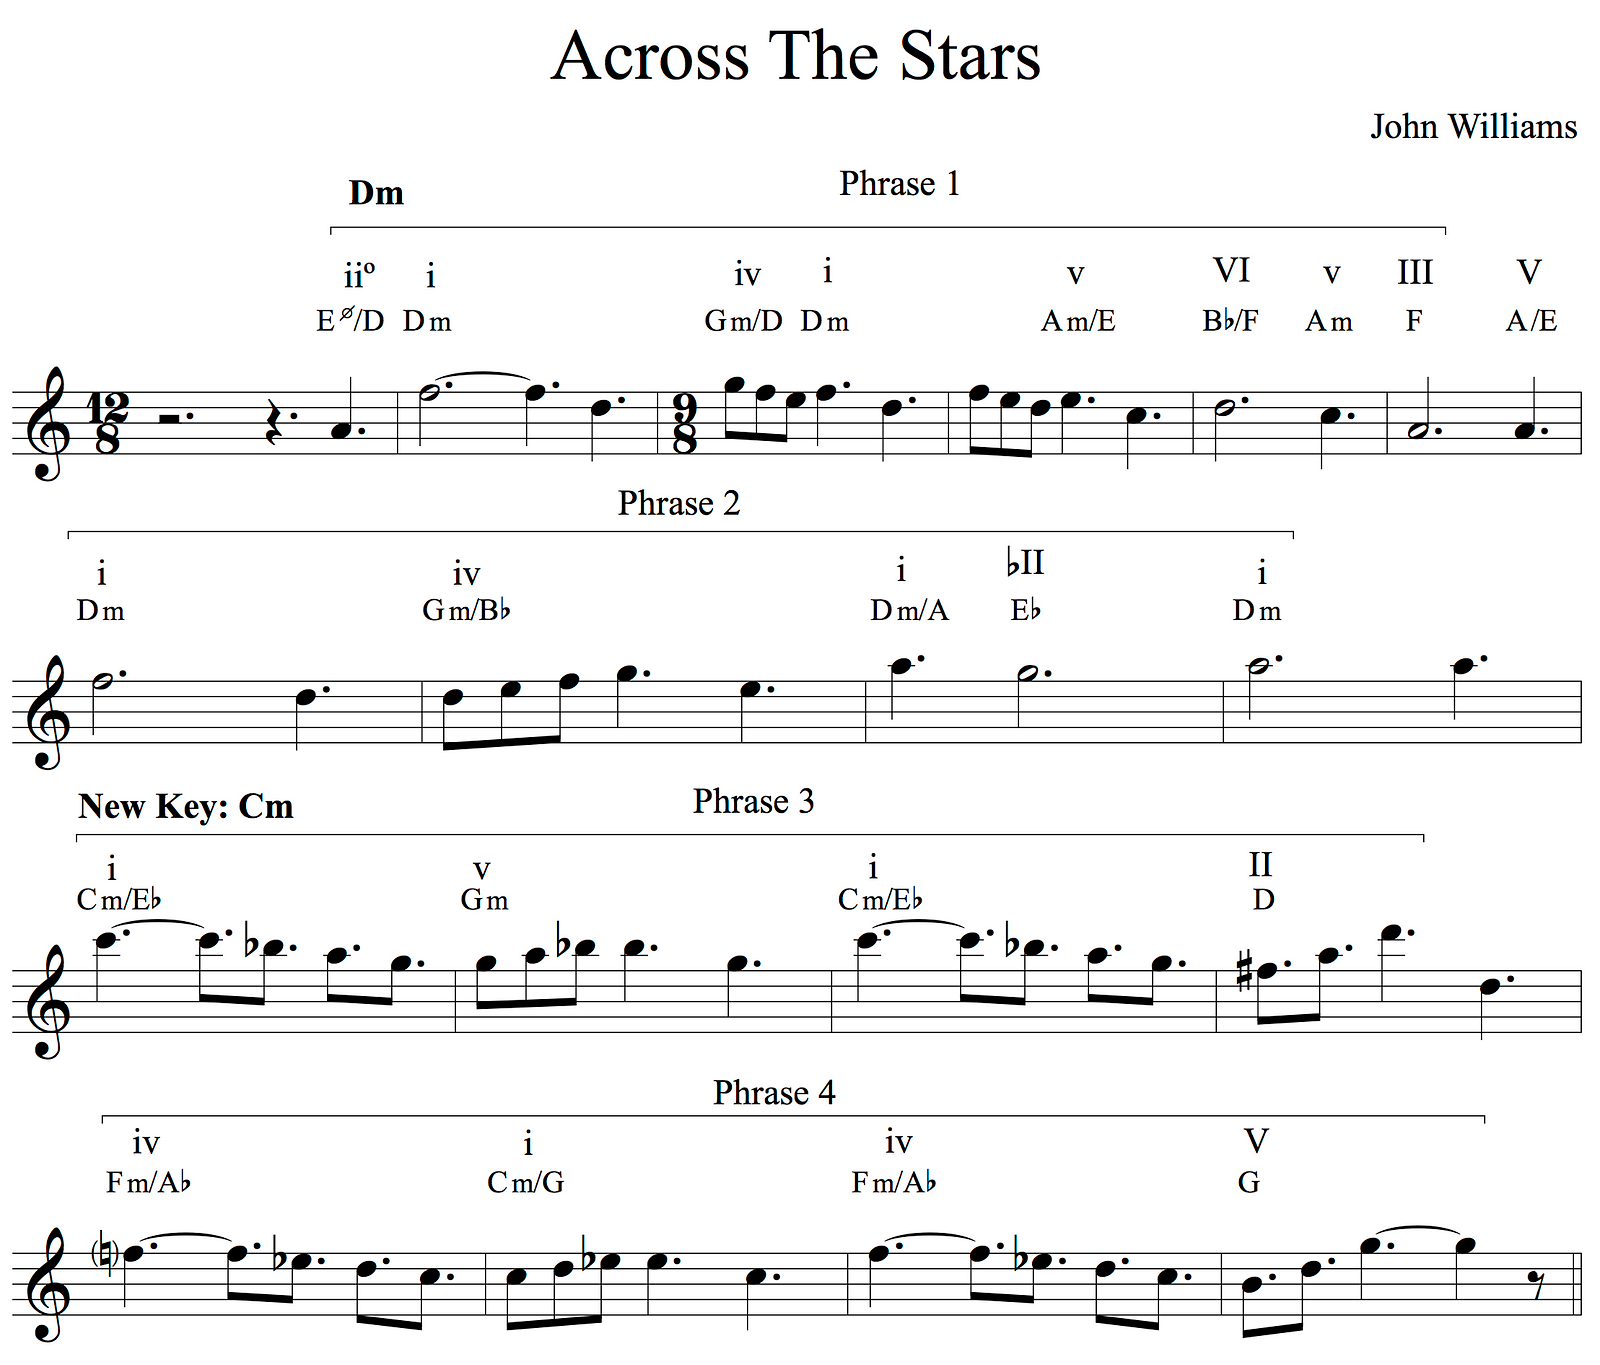 The Music Of Star Wars Analyzed Across The Stars Love Theme From